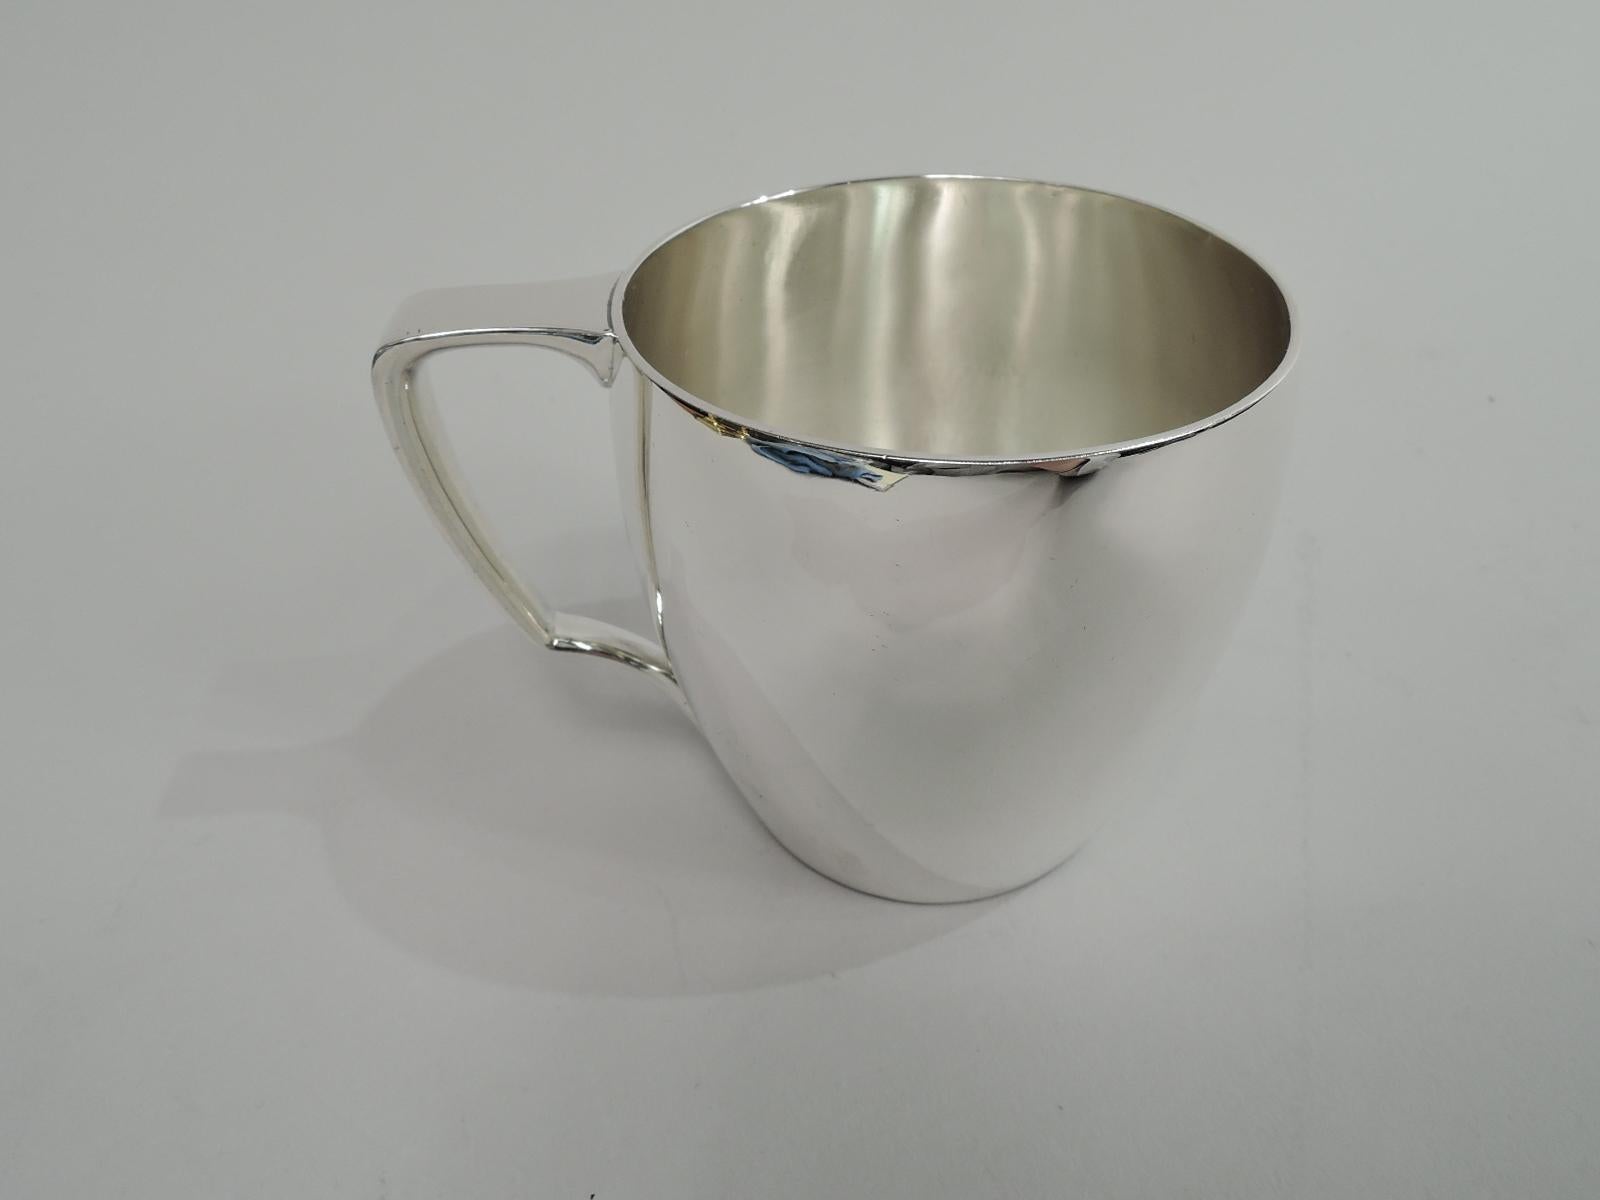 Modern sterling silver baby cup. Made by Tiffany & Co. in New York. Barrel-form with scroll bracket handle. Elegant form with plenty of room for engraving. Fully marked including maker’s stamp, pattern no. 20850, and director’s letter M (1947-56).